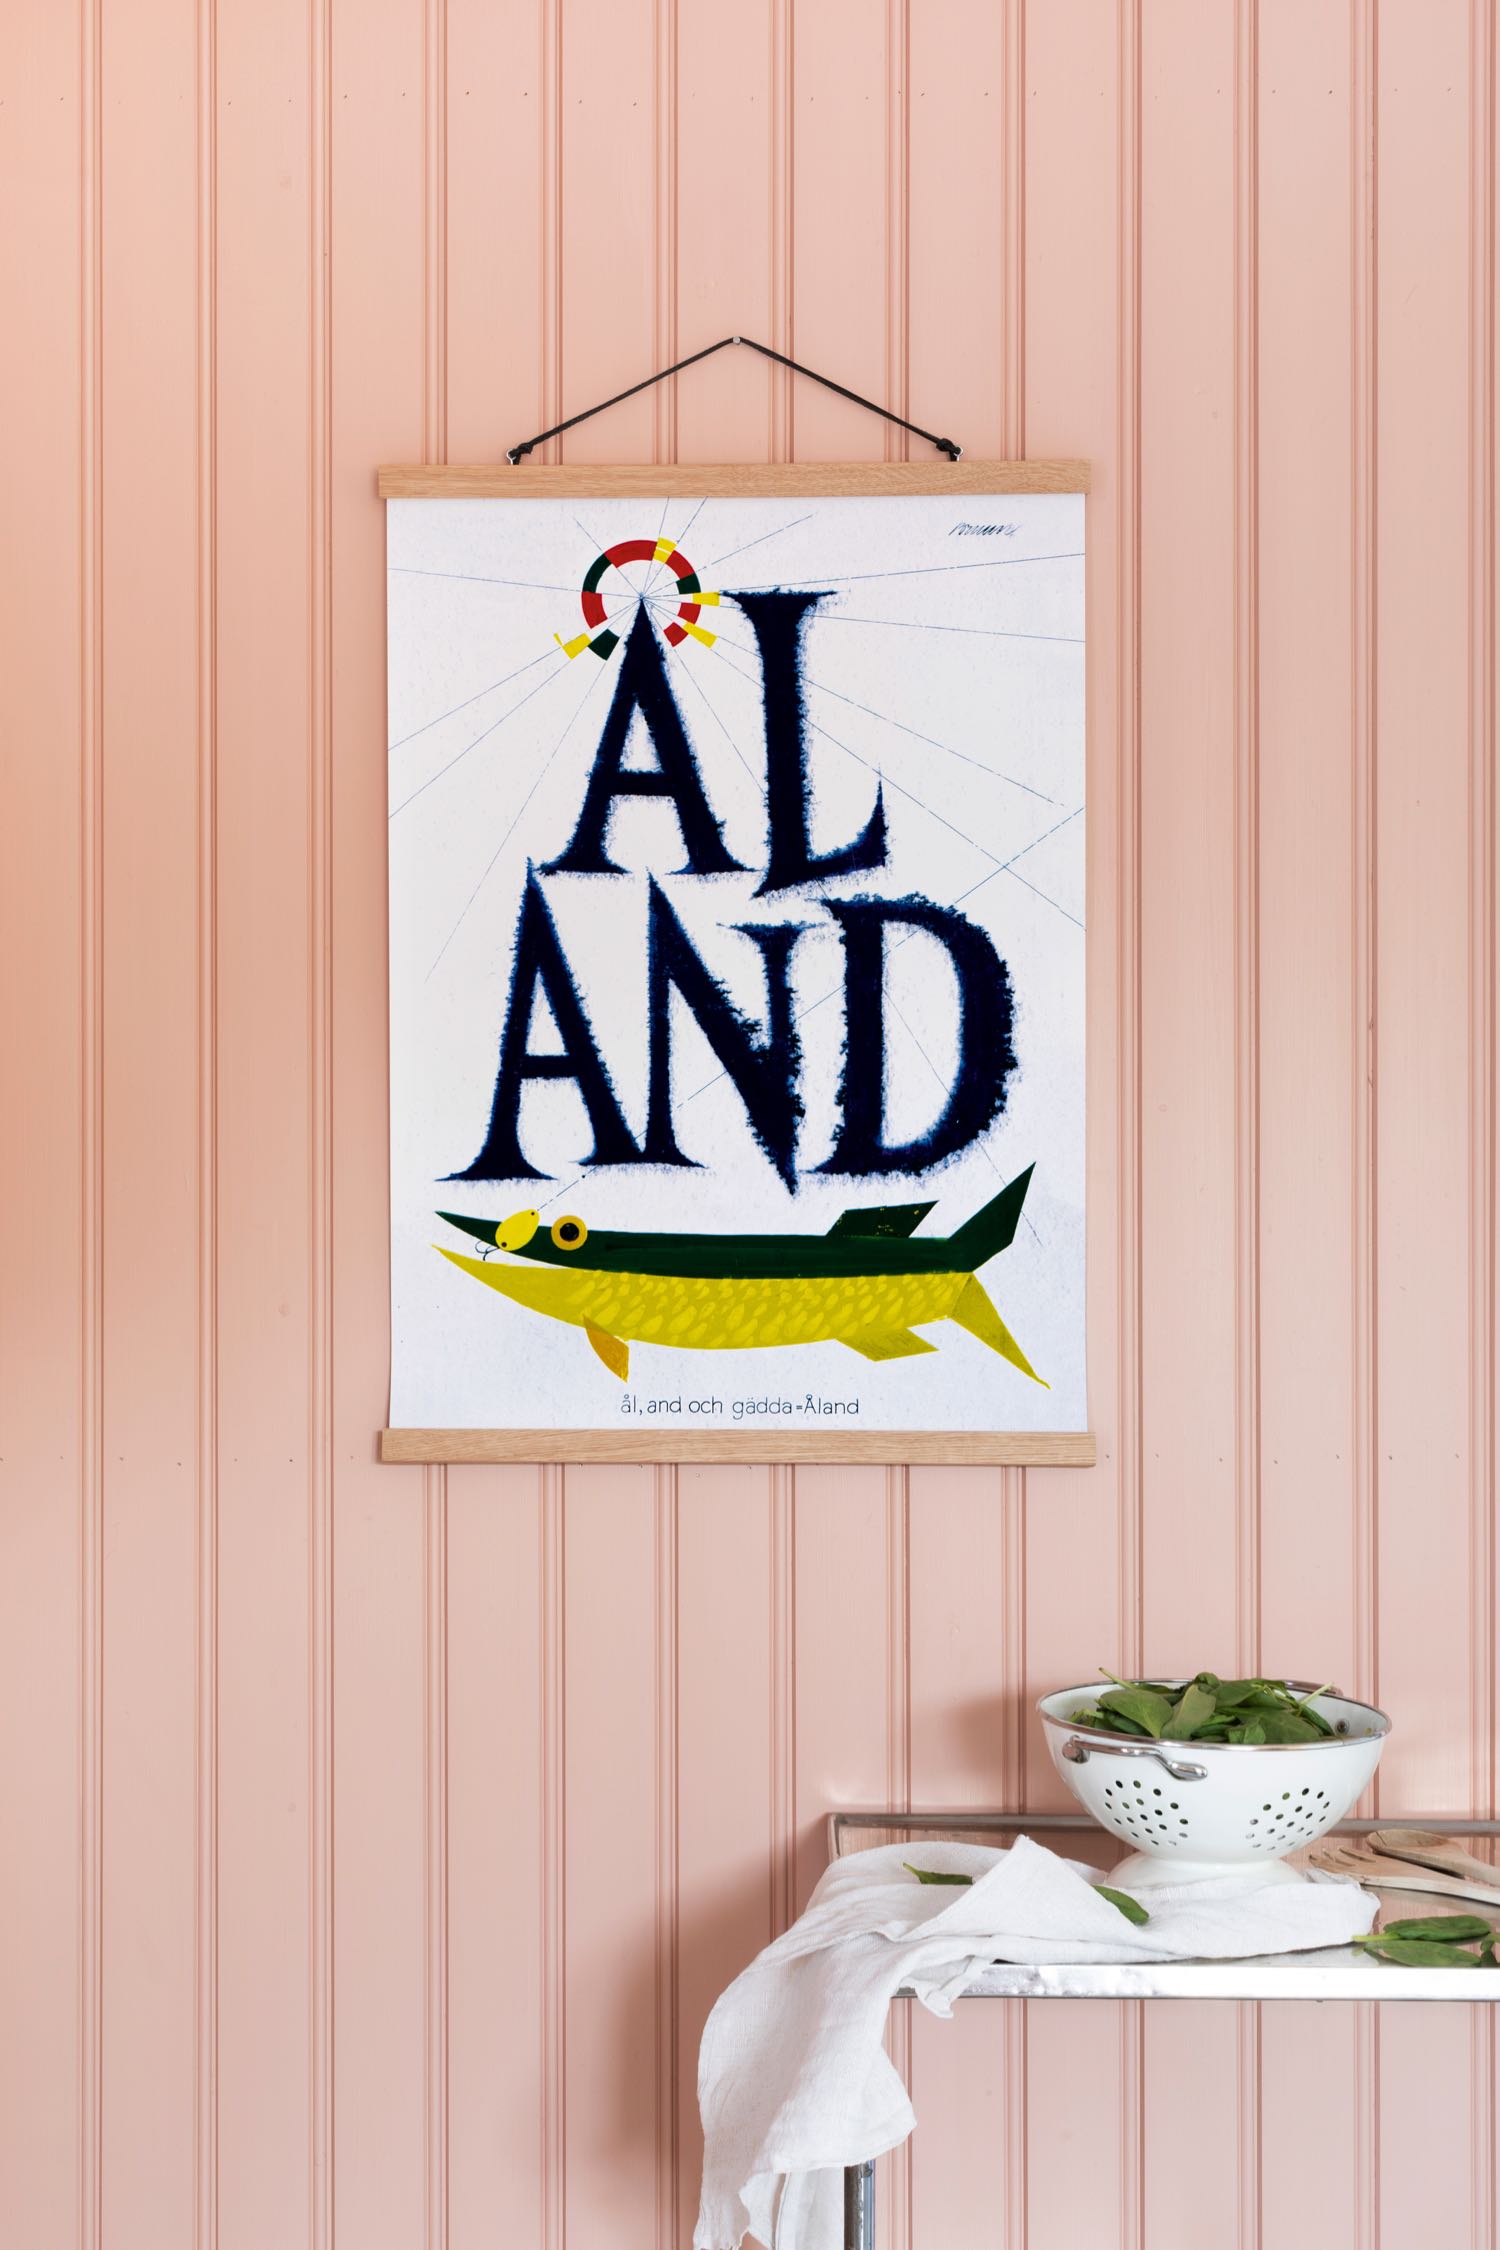 Poster of the Åland islands by Eric Bruun